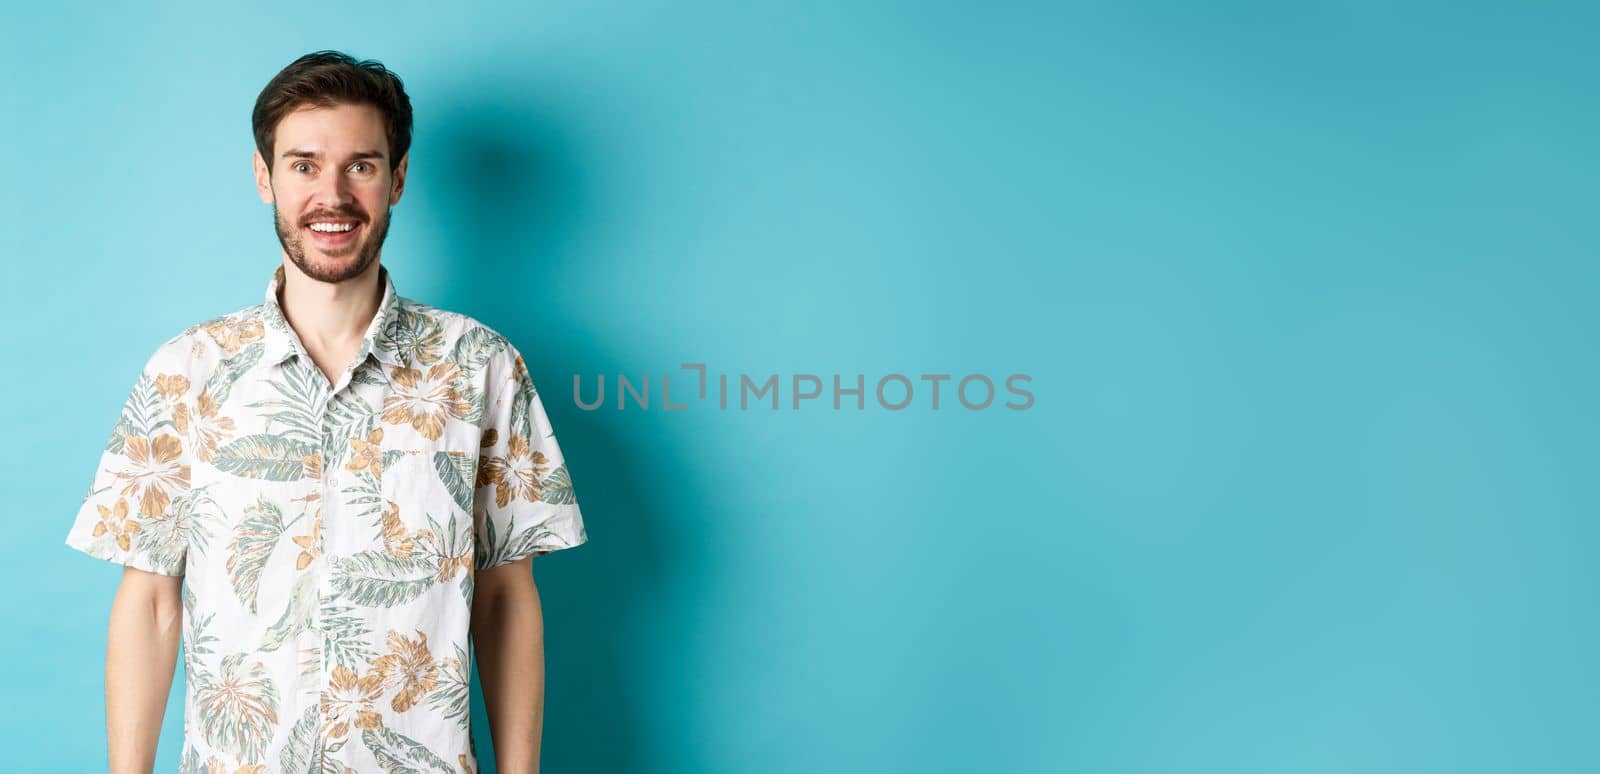 Cheerful caucasian guy going on vacation, wearing summer shirt and smiling, standing on blue background.